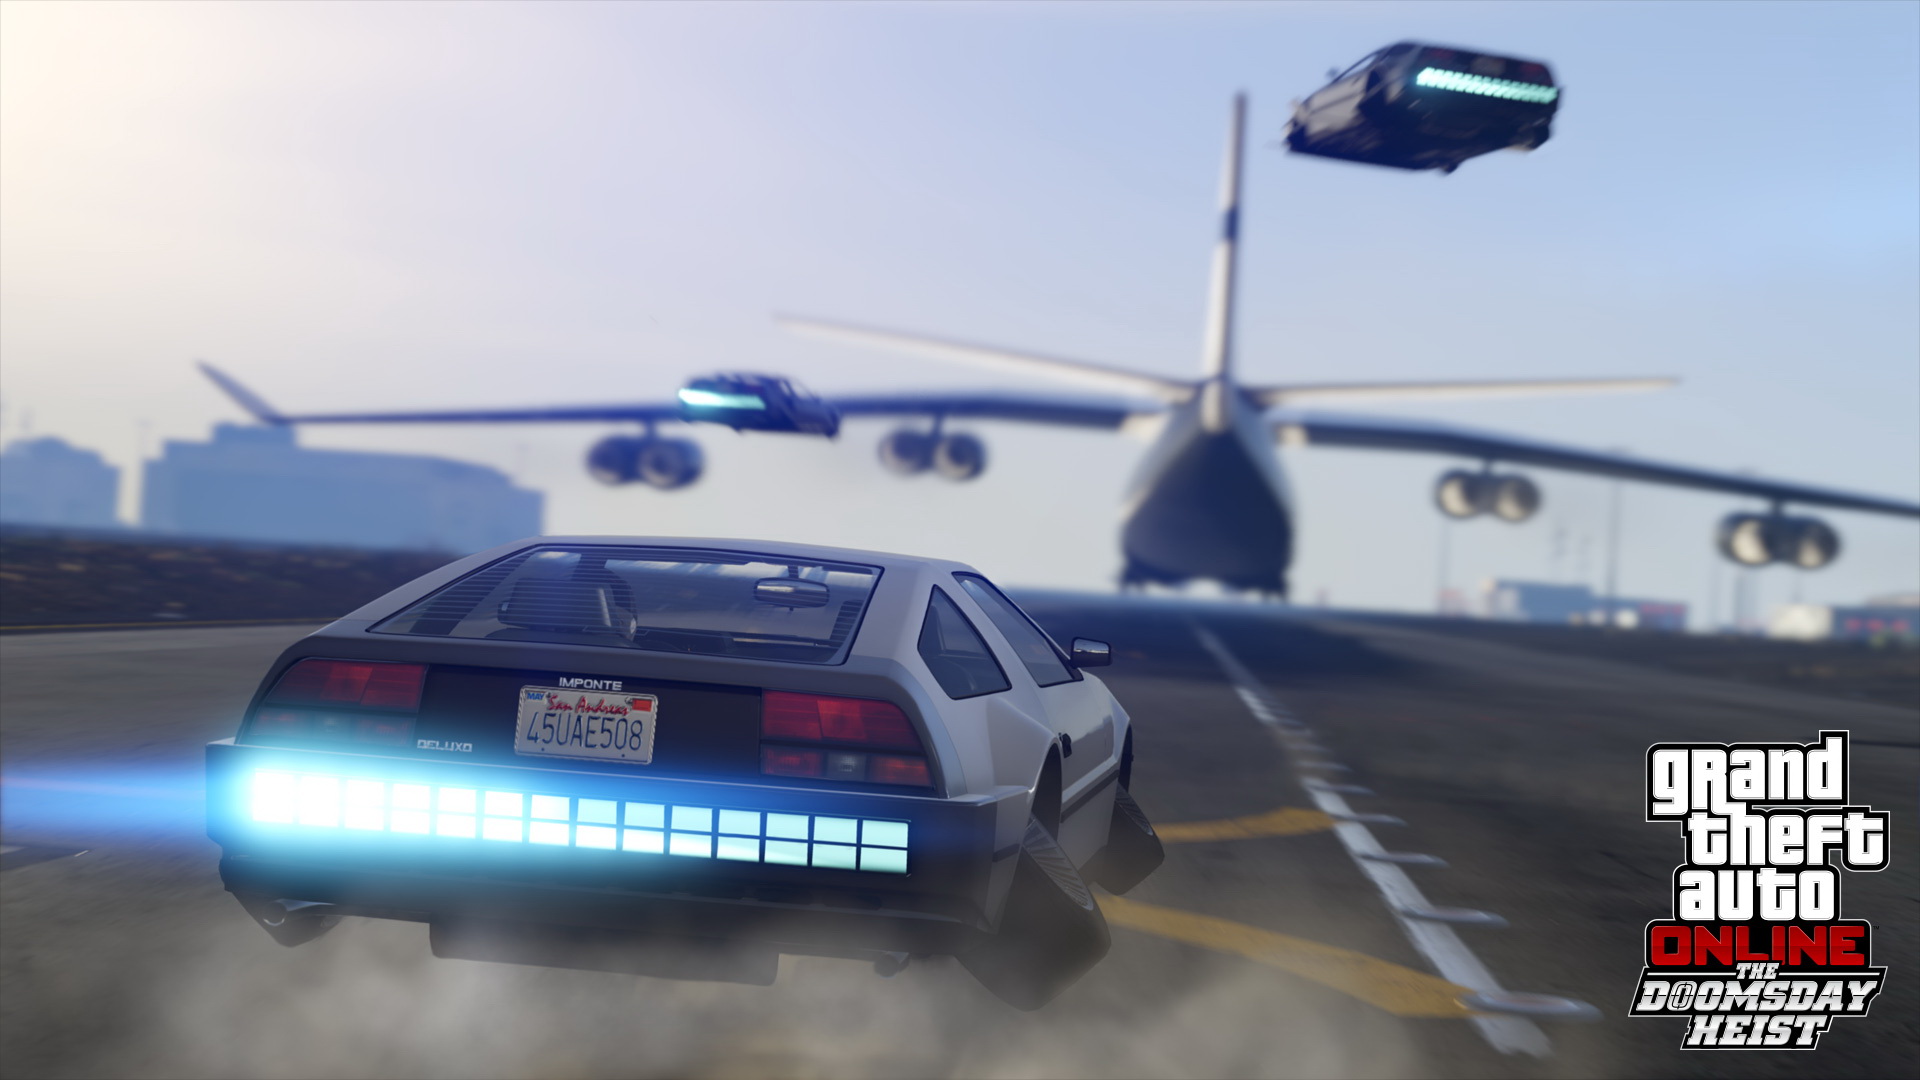 Grand Theft Auto V System Requirements 2023